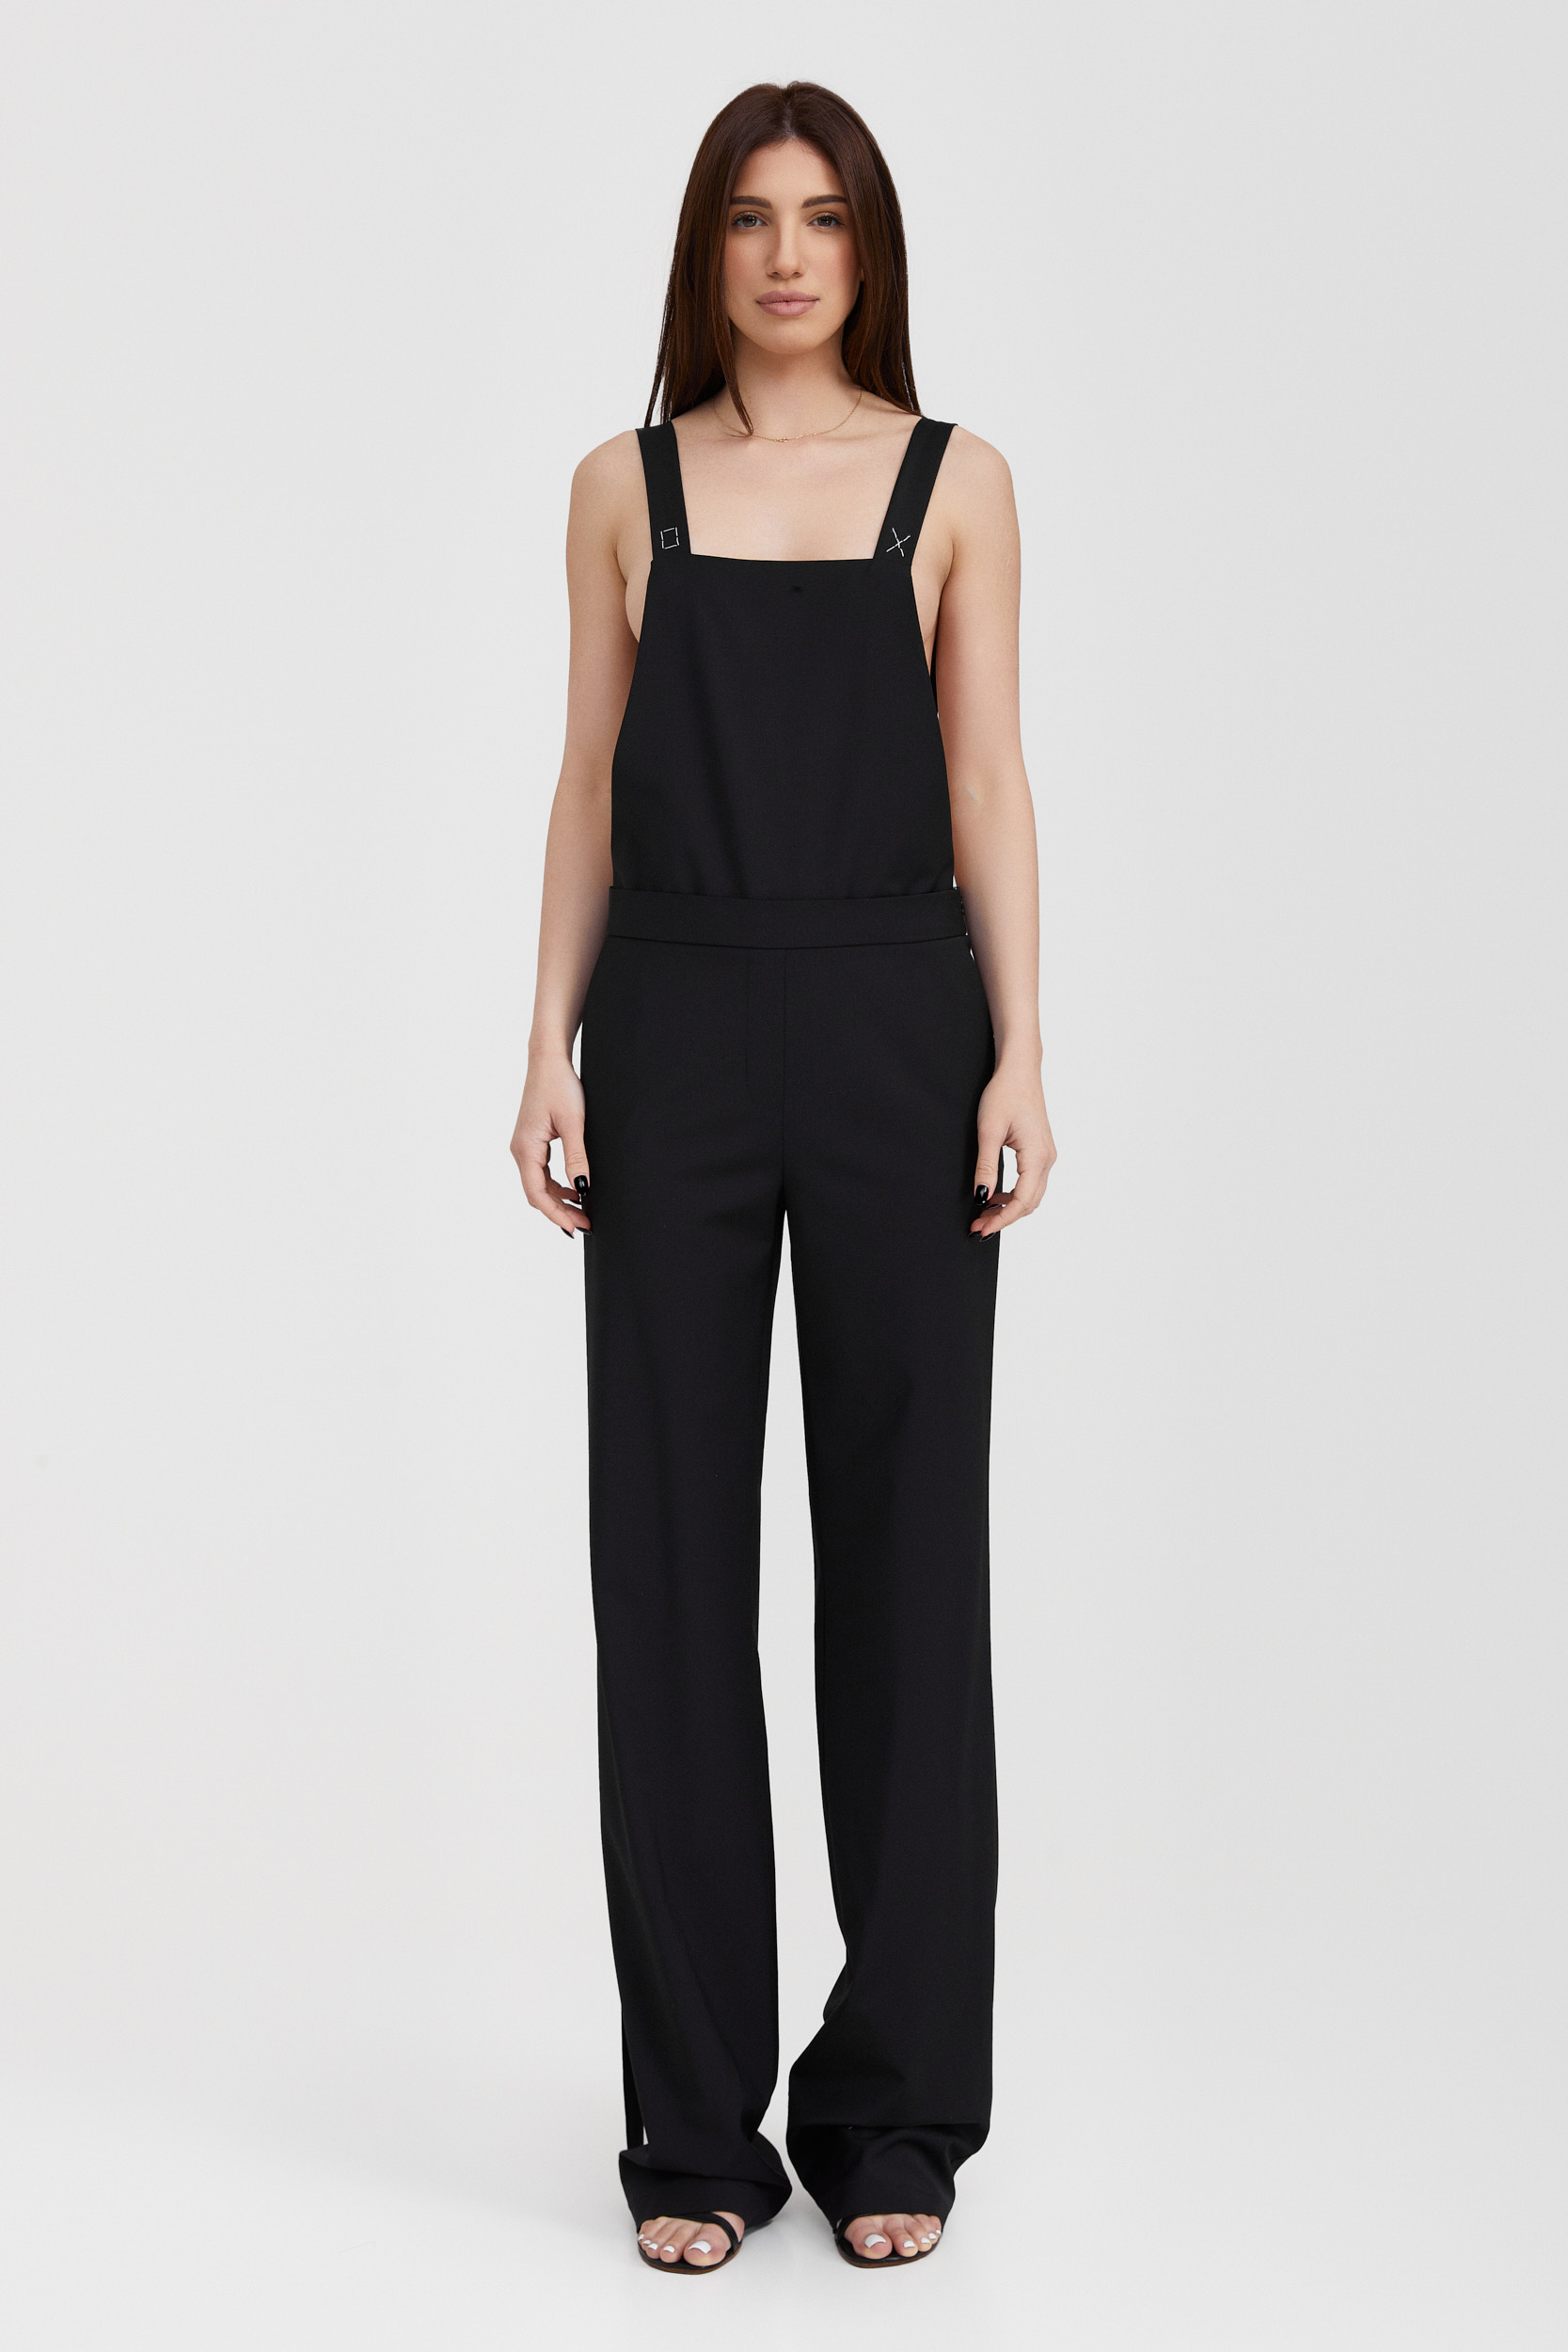 Black overall